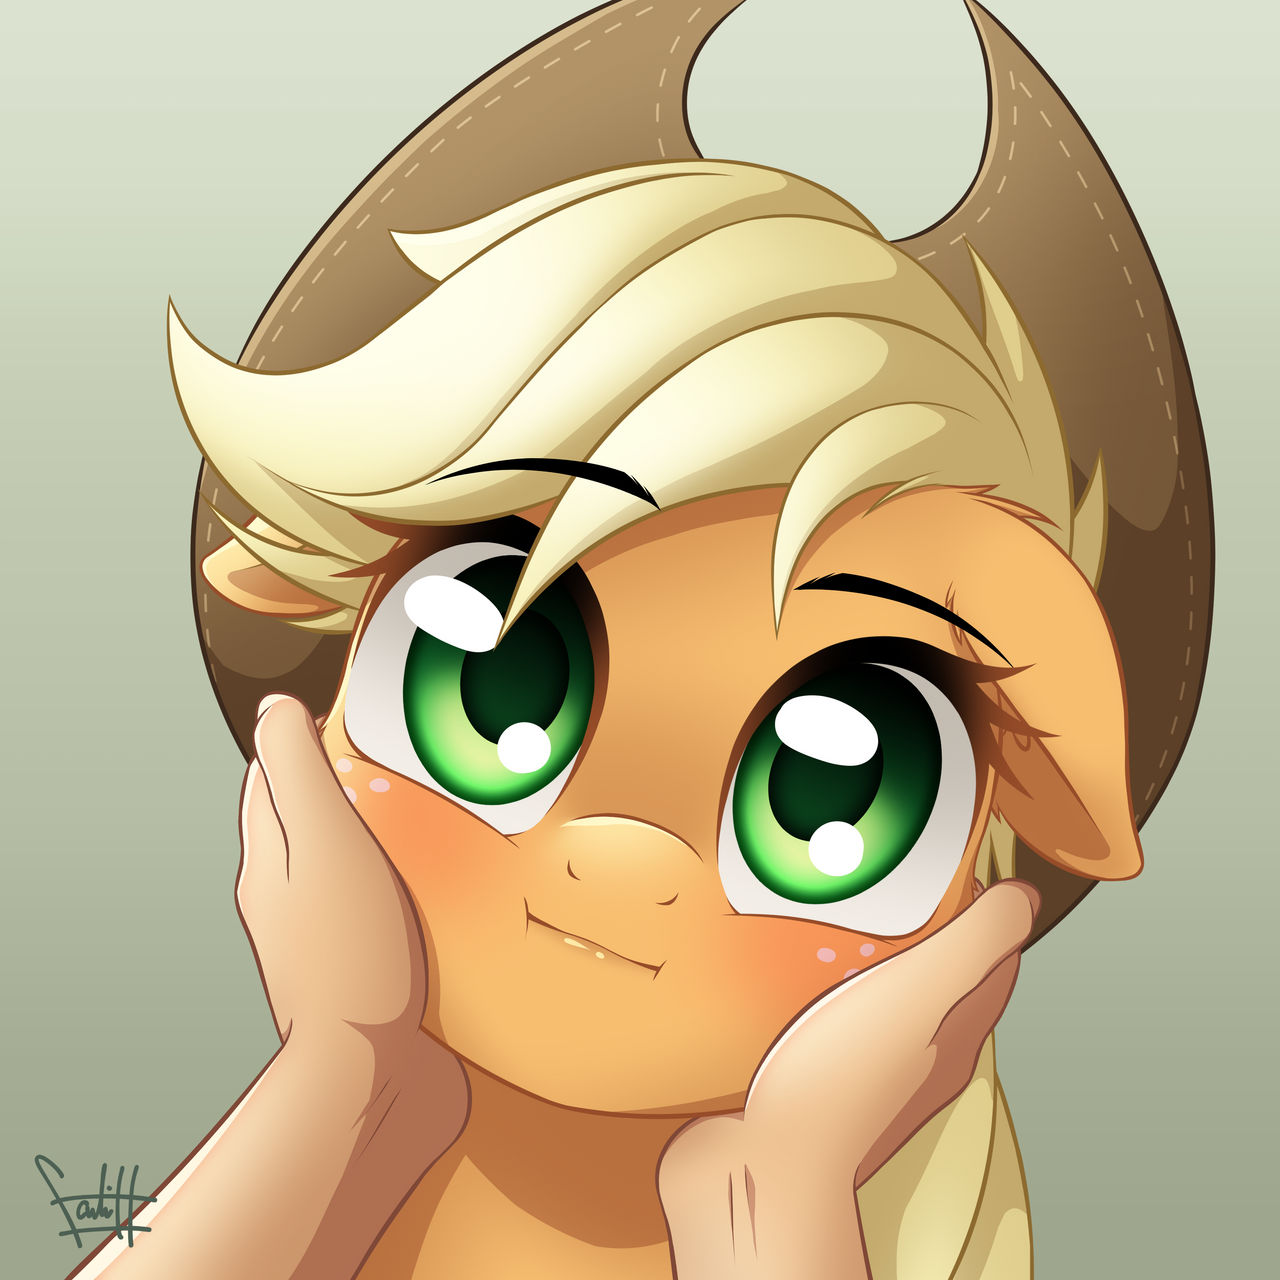 squeeze_that_apple___applejack_by_fadlihalimns_dfqld2i-fullview.jpg